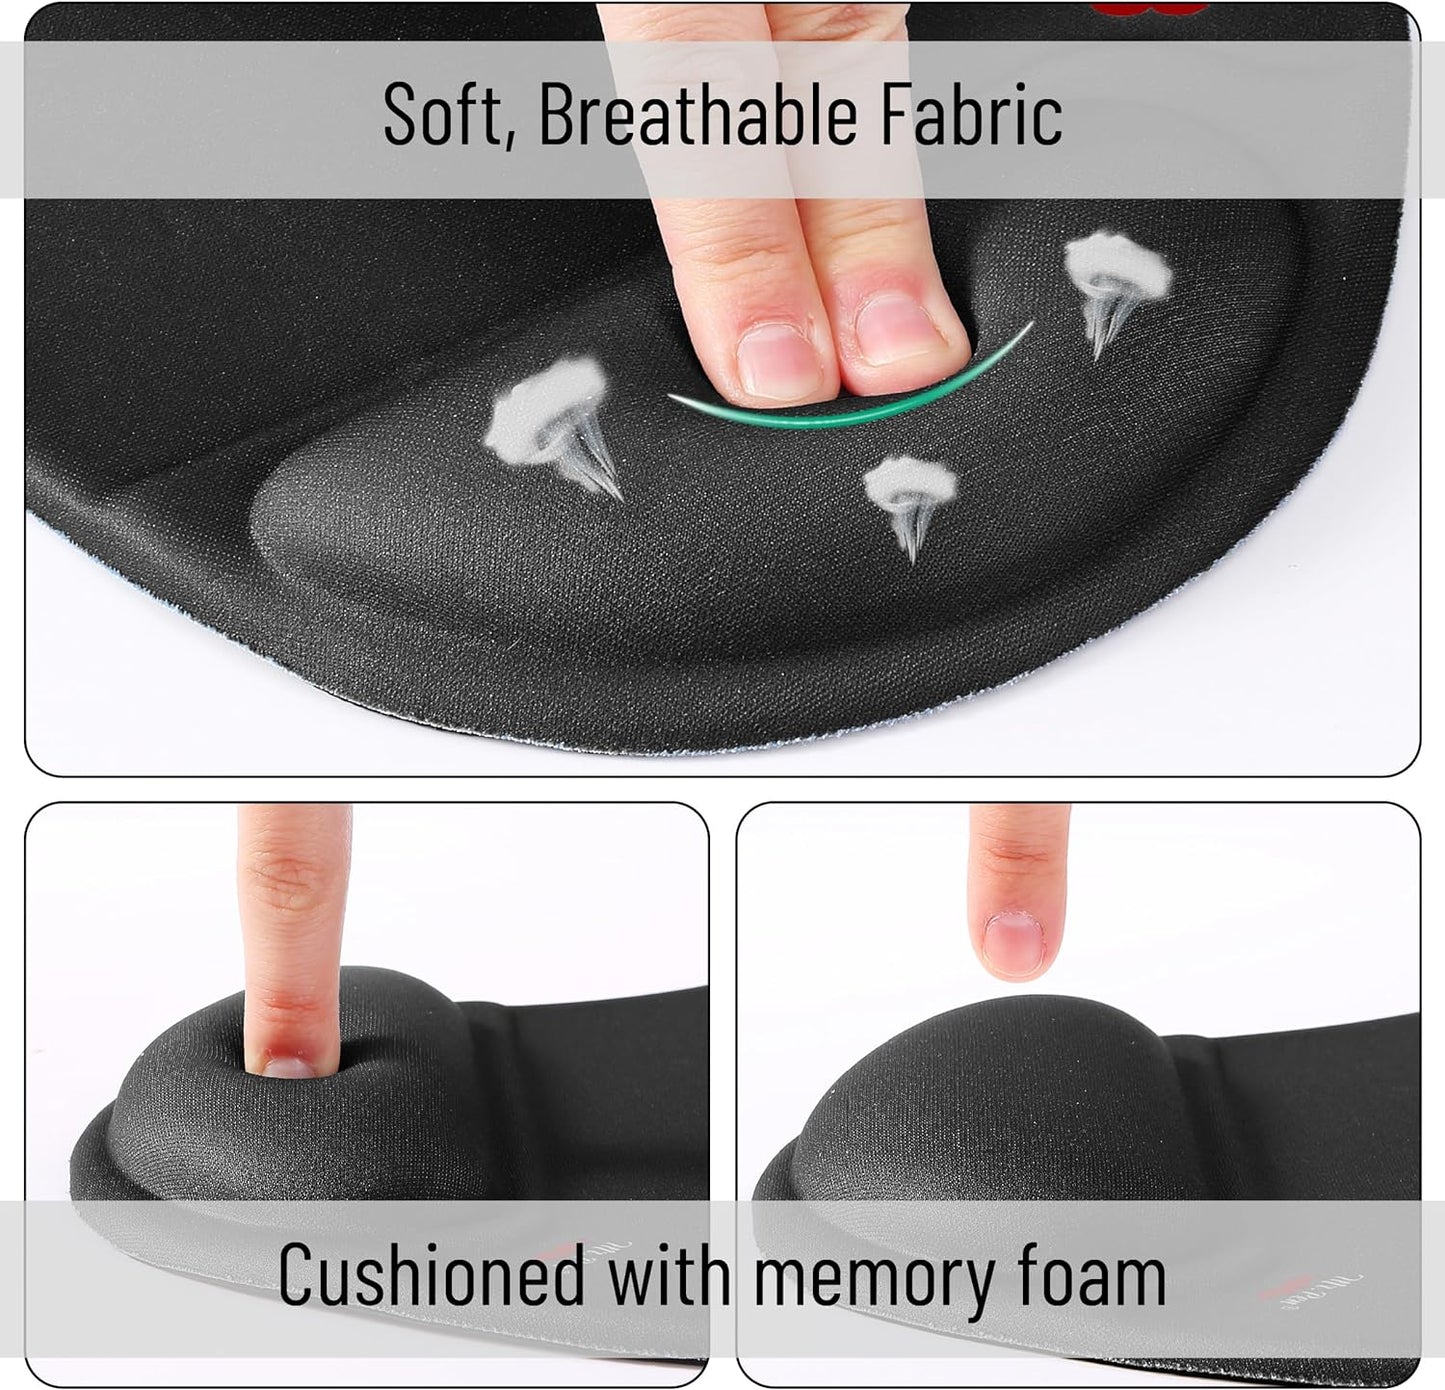 Mr. Pen- Mouse Pad with Wrist Support